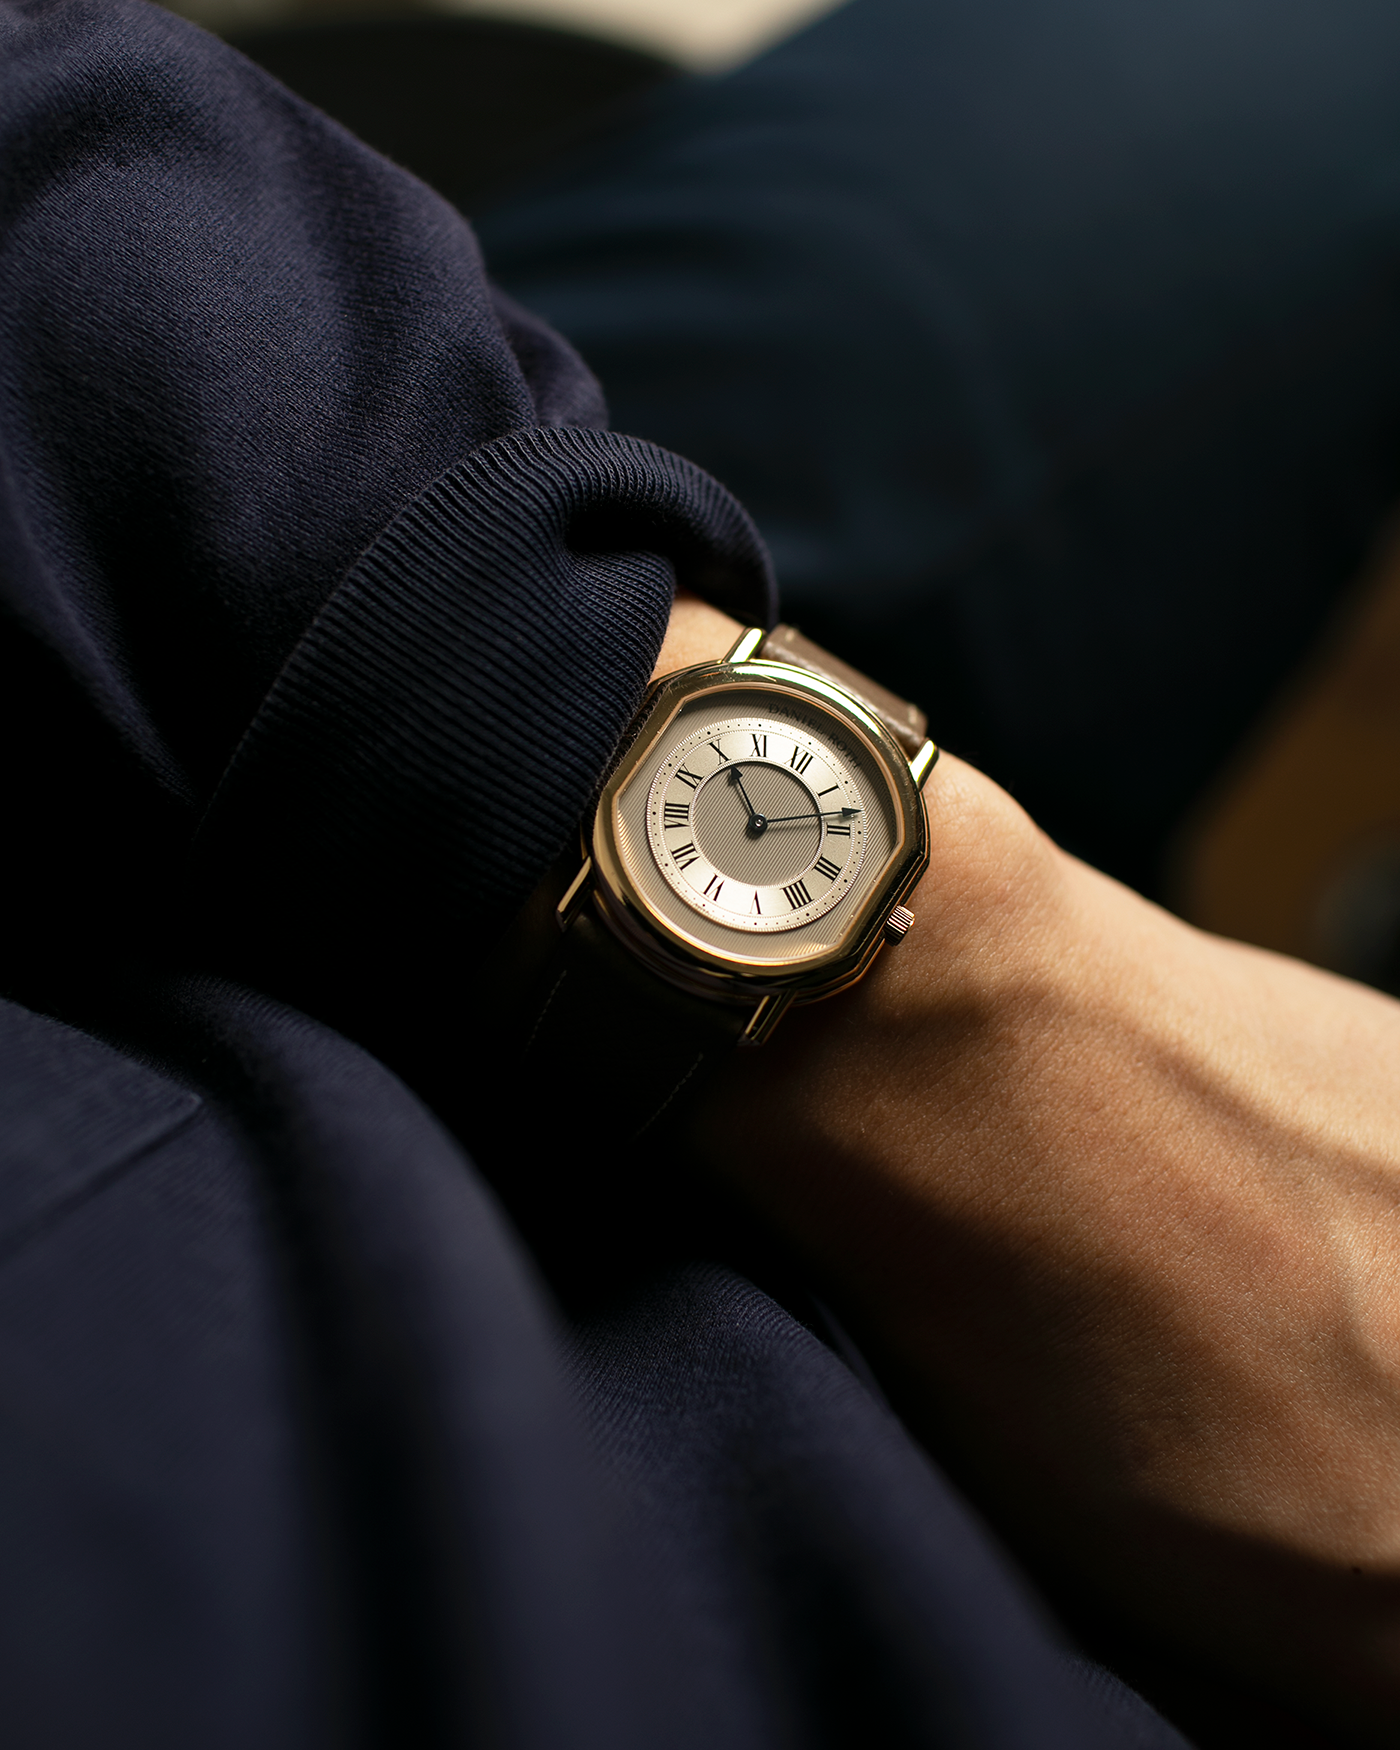 Brand: Daniel Roth Year: 1990’s Model: 2107 Material: 18k Yellow Gold Movement: Frederic Piguet Cal. 71 Case Diameter: 35mm X 38mm Strap: Nostime Taupe Grained Calf with 18k Yellow Gold Tang Buckle